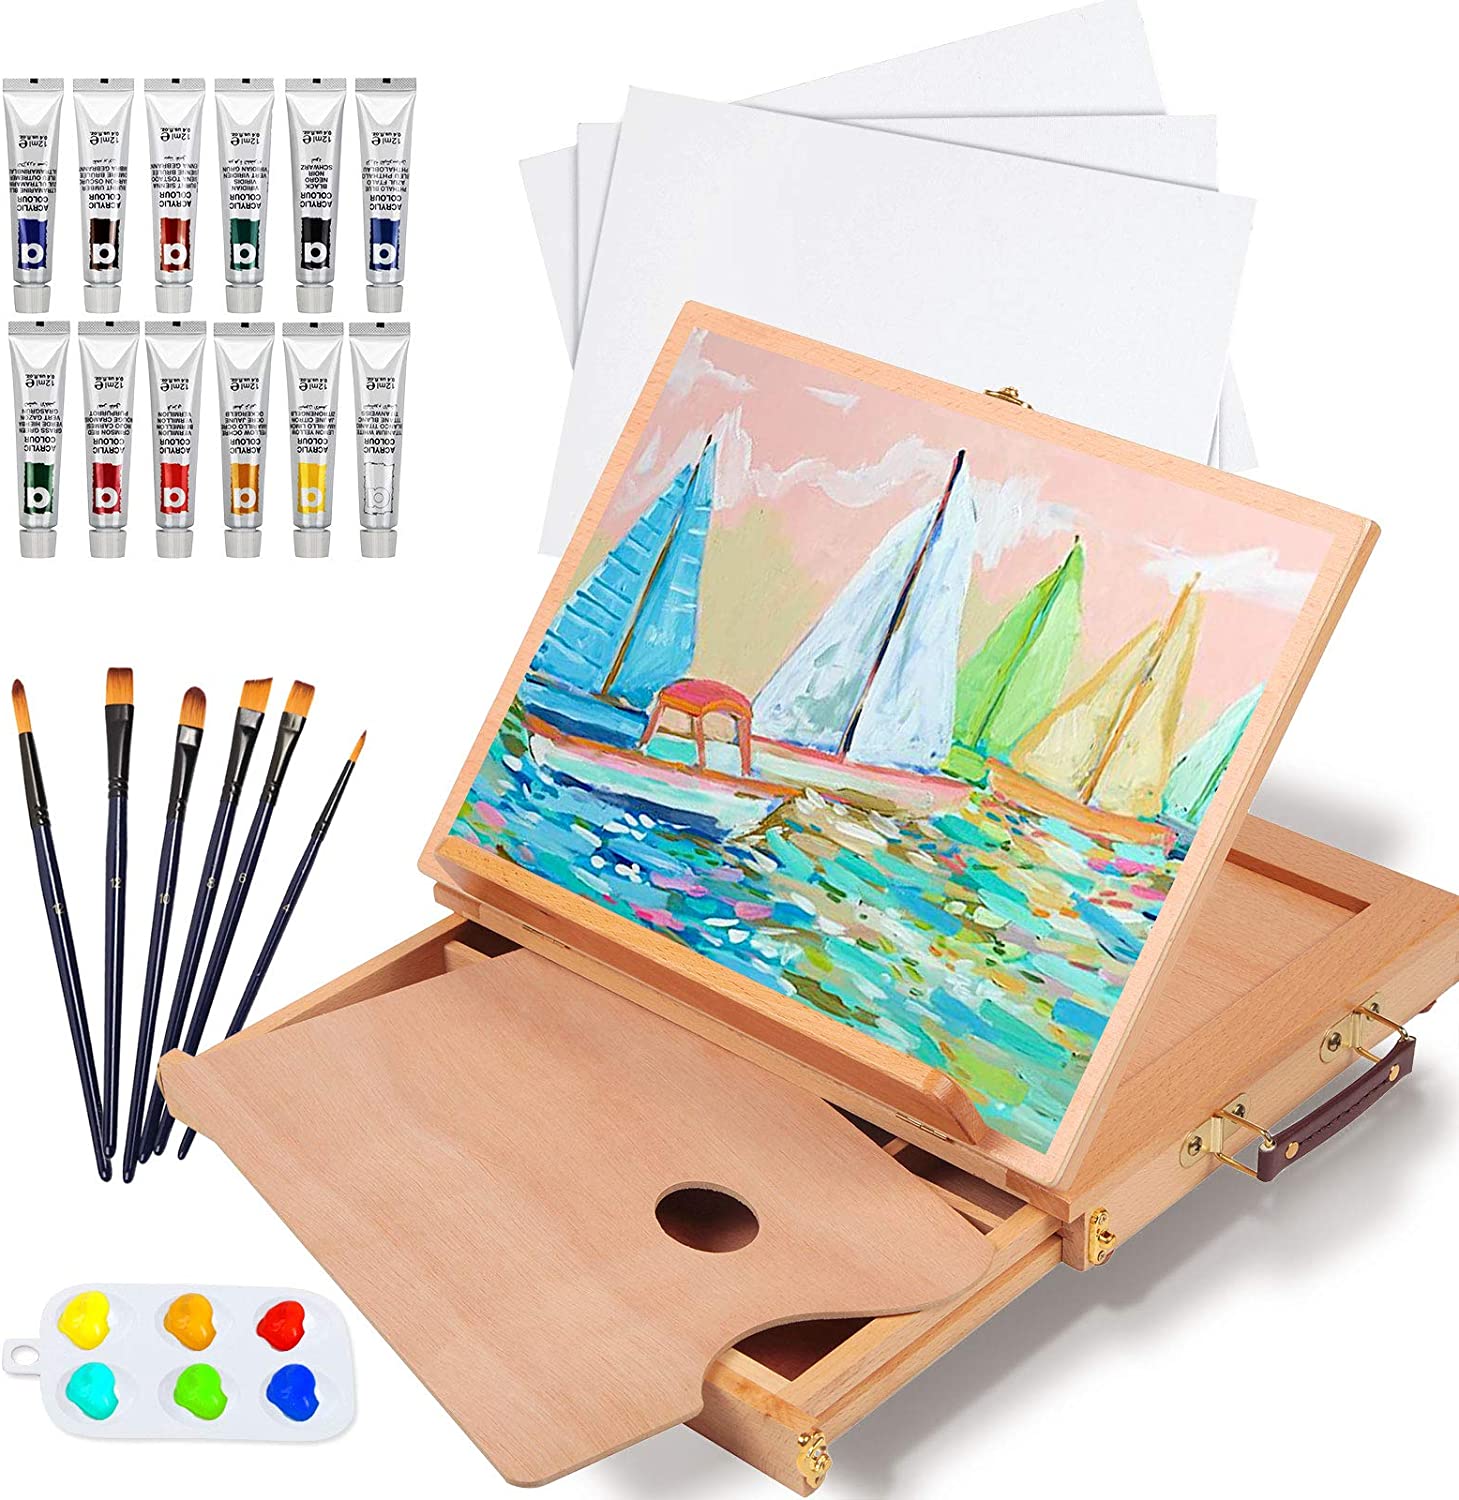 Acrylic Painting Kit for Beginners